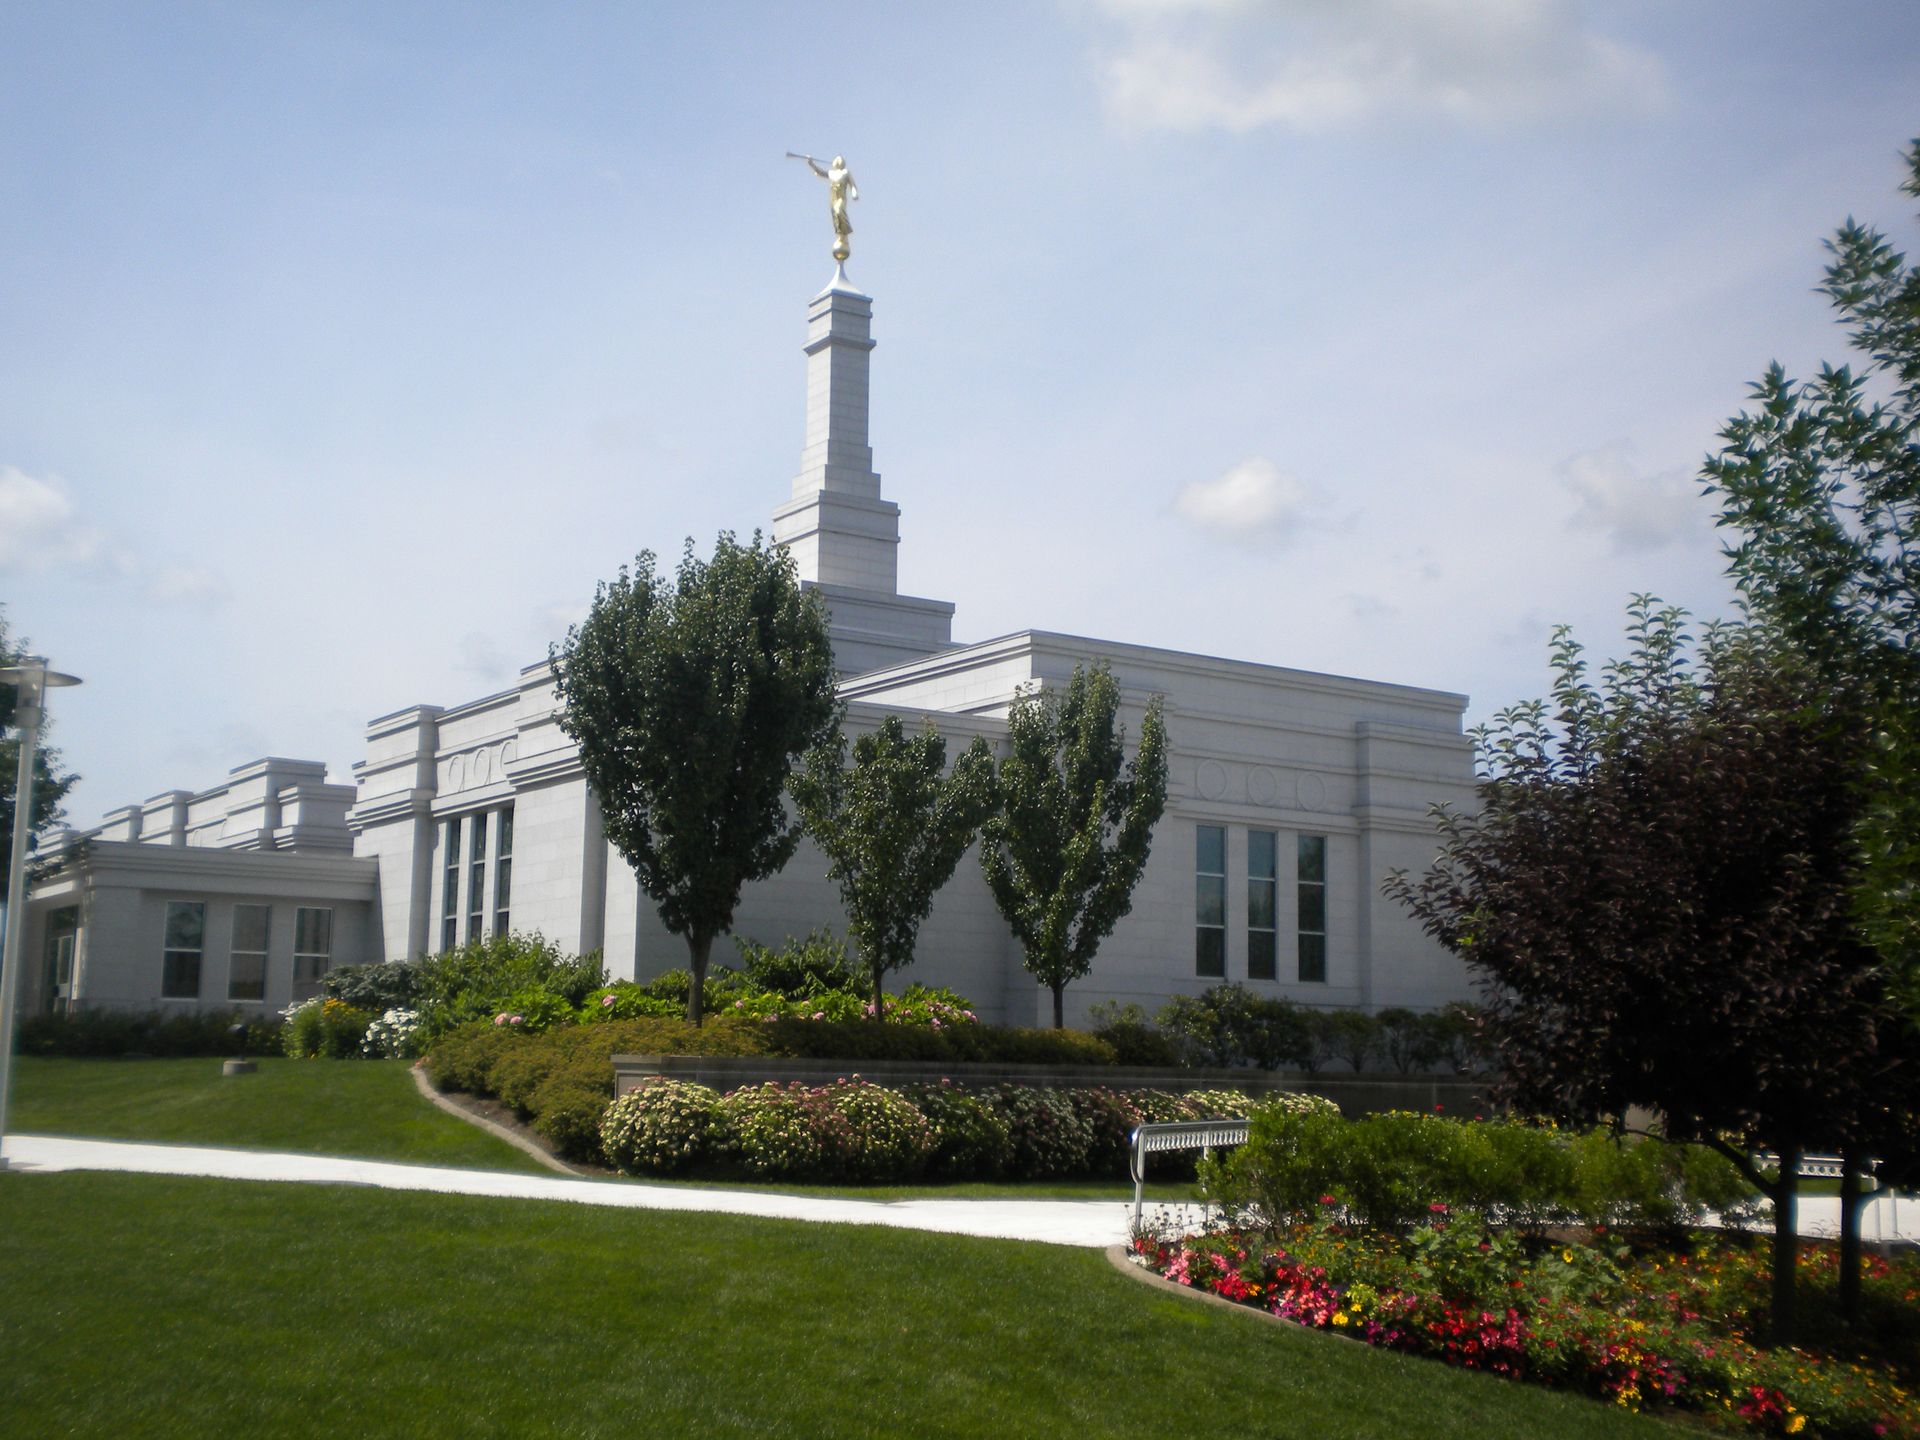 The Palmyra New York Temple and grounds on a sunny day.